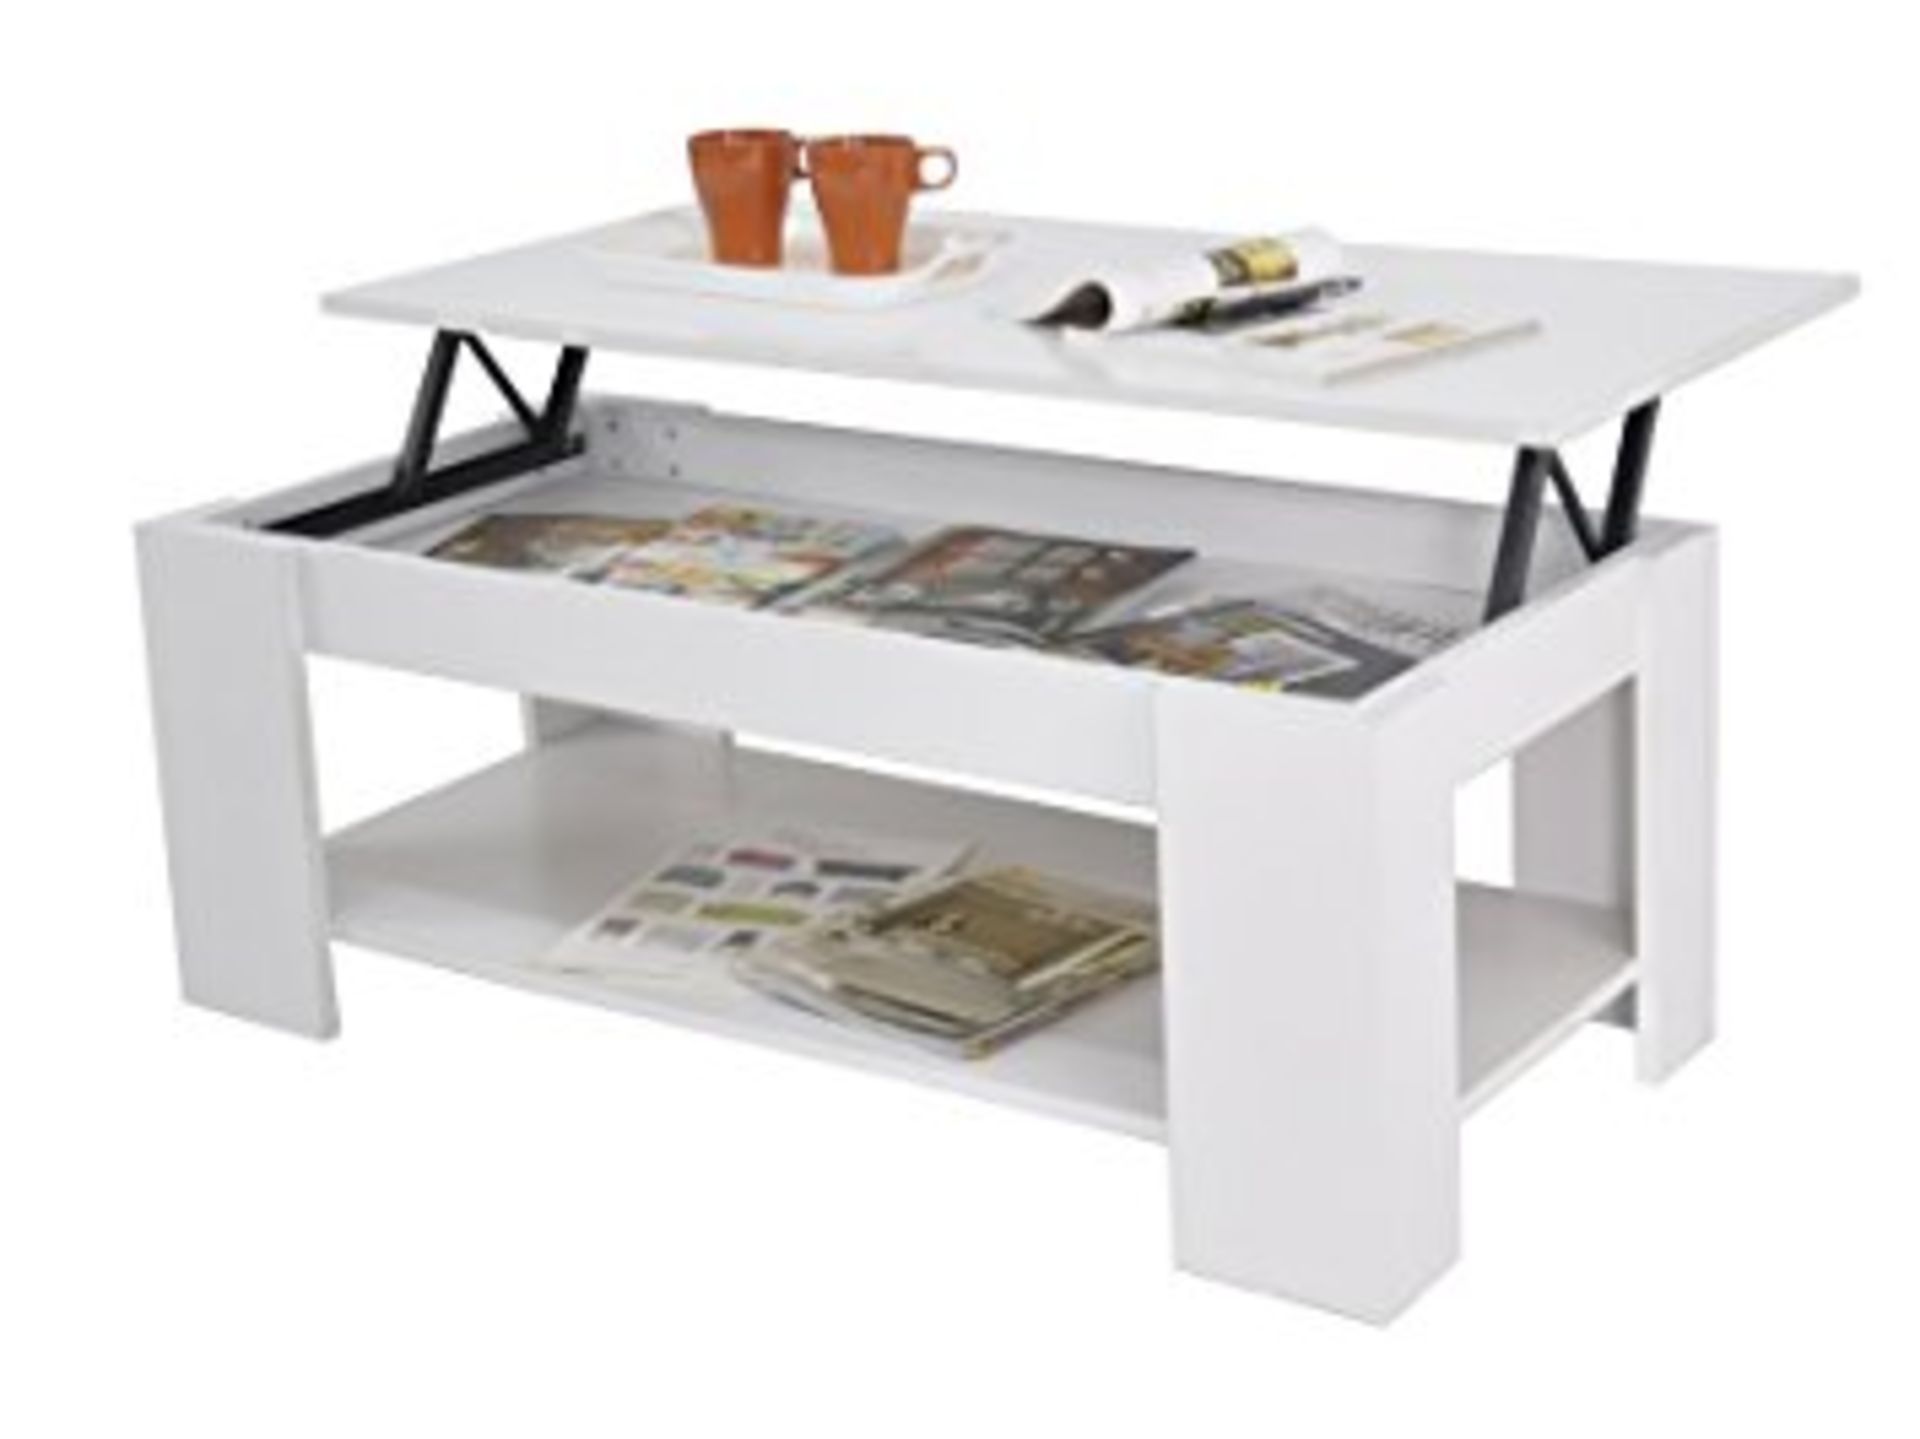 1 BRAND NEW BOXED KIMBERLEY WHITER LIFT UP COFFEE TABLE